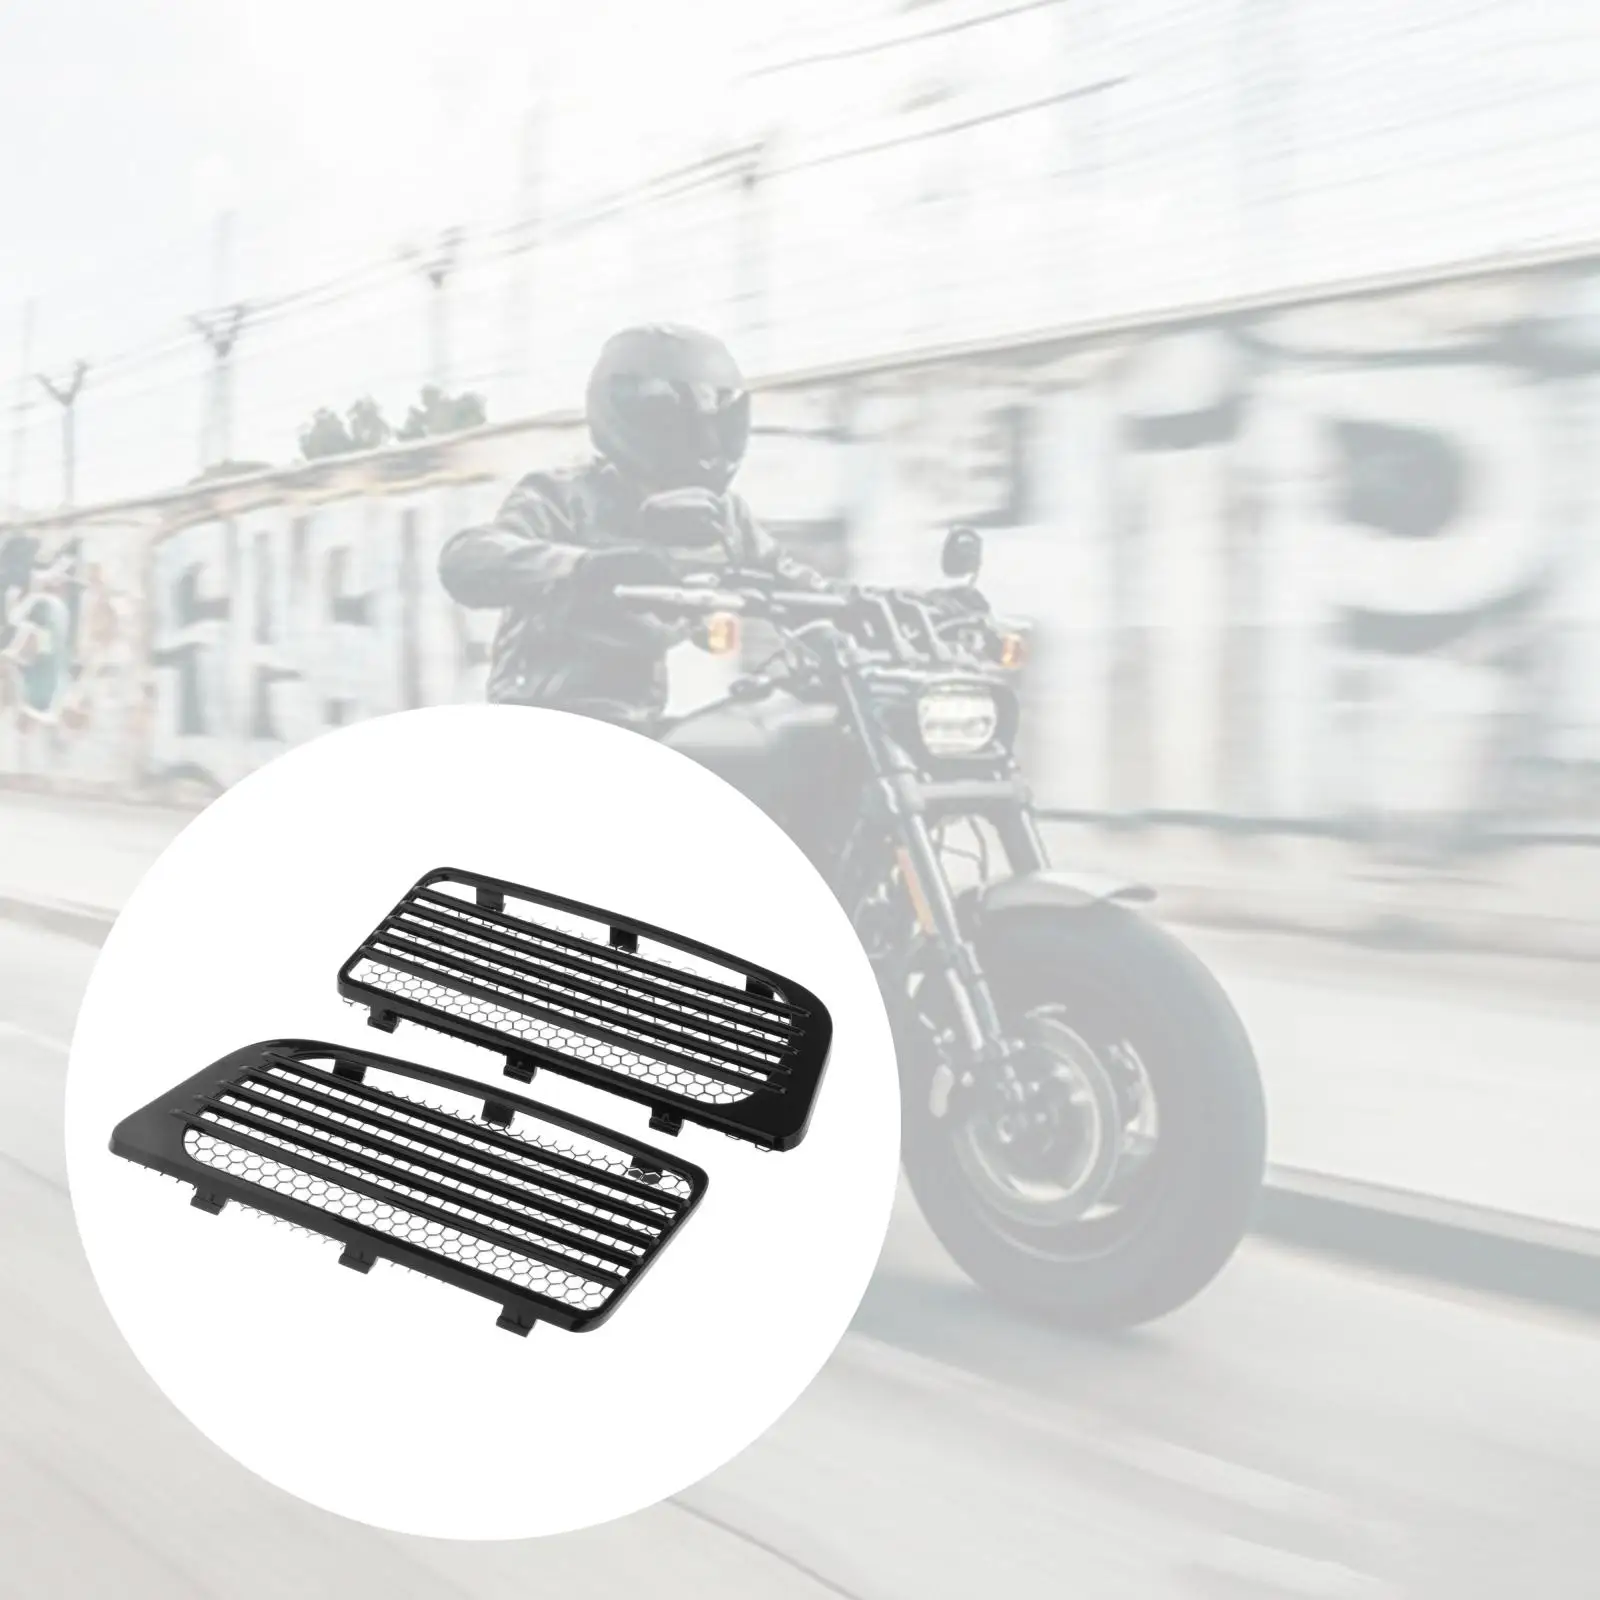 2pcs Motorcycle Radiator Grills w/ Metal Mesh Fit for Harley Touring Twin Cooled 14+ Replacement Parts Accessories